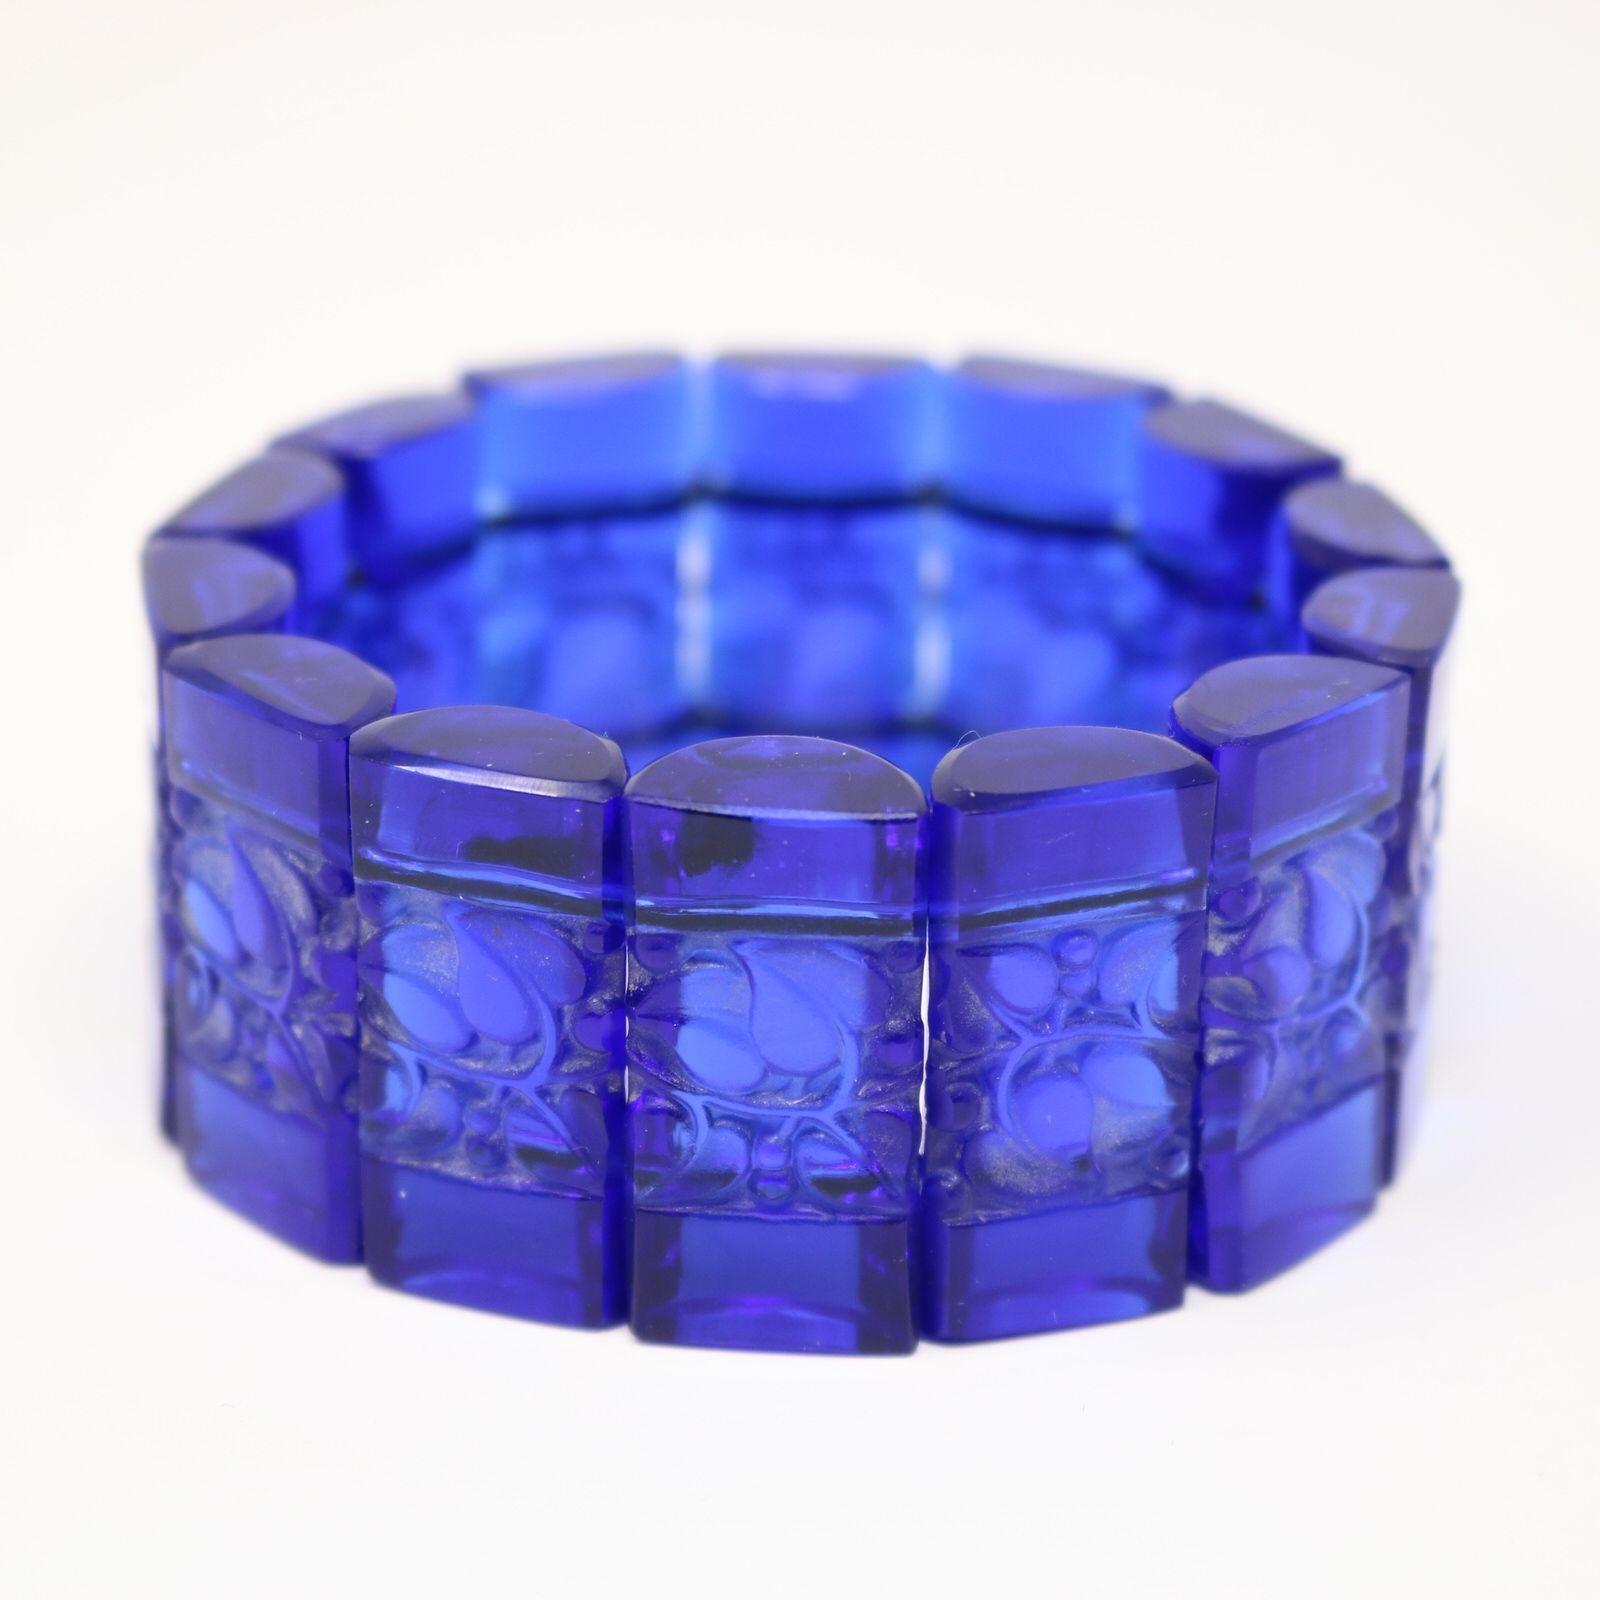 Rene Lalique blue glass 'Ceriser' Bracelet. The bracelet consists of 14 rectangular, cylinder-half shaped tablets, strung together with elastic. Ceriser is french for cherry tree and each tablet has molded leaf and berry decoration. Engraved makers